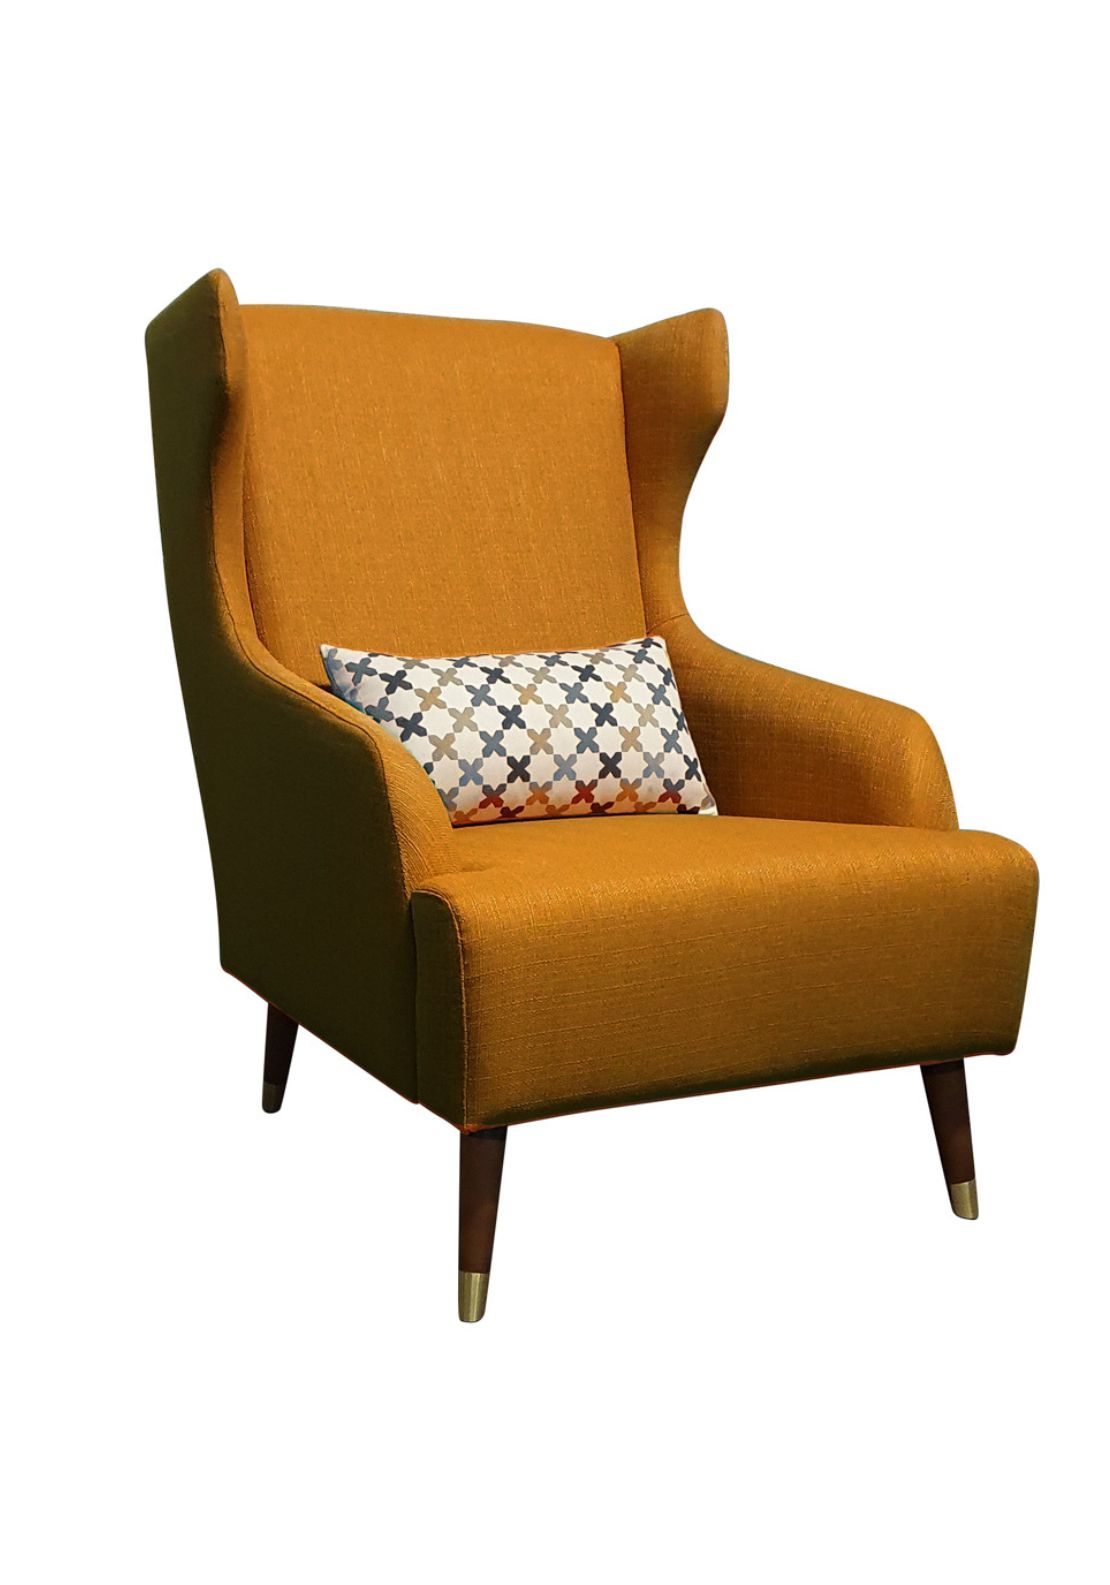 The Home Collection Lauren High Back Chair With Cushion - Orange 1 Shaws Department Stores